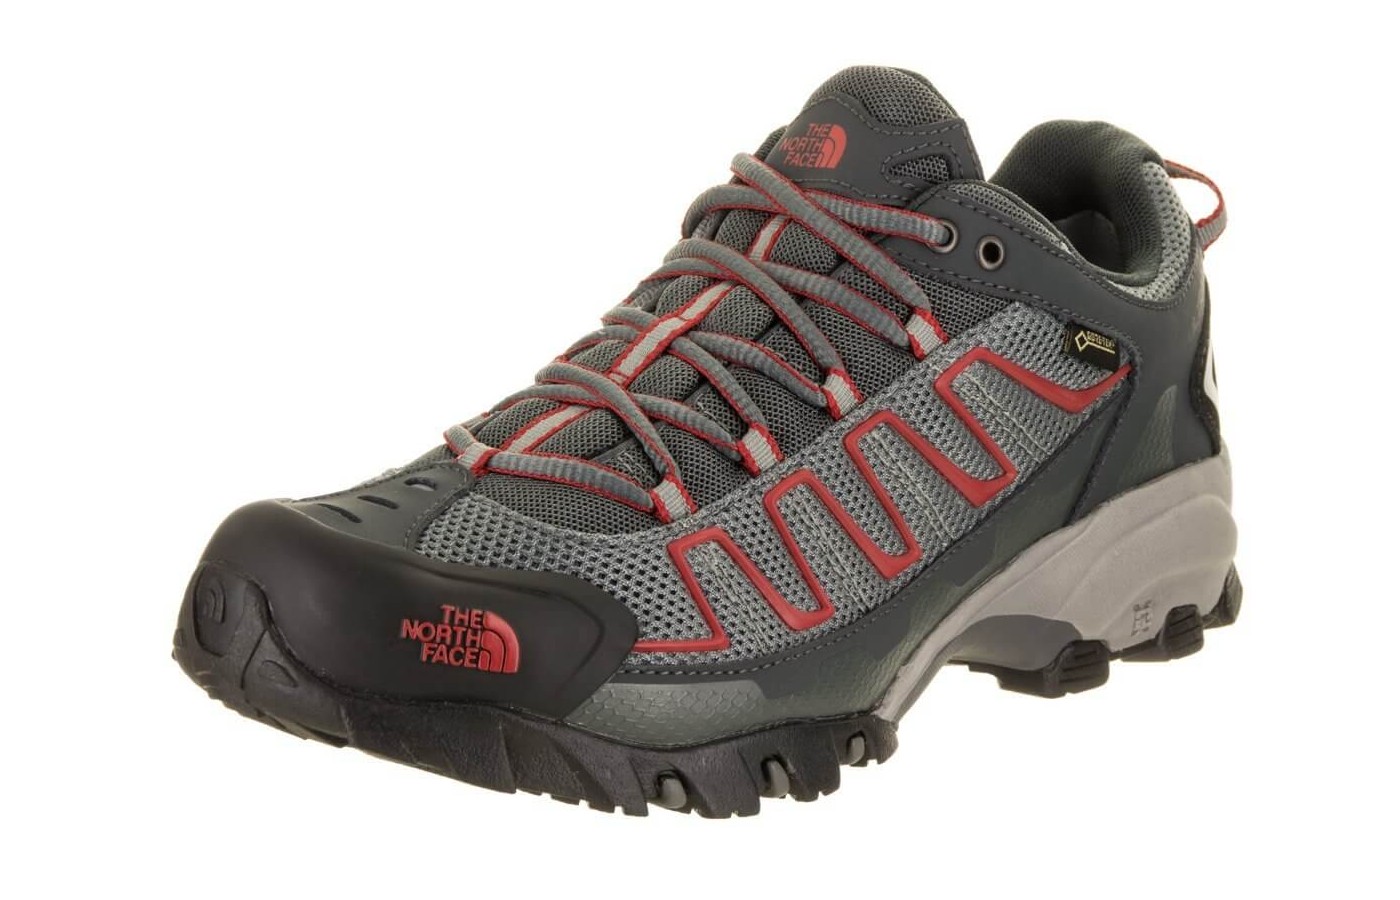 The The North Face Ultra 110 GTX features a mesh upper 